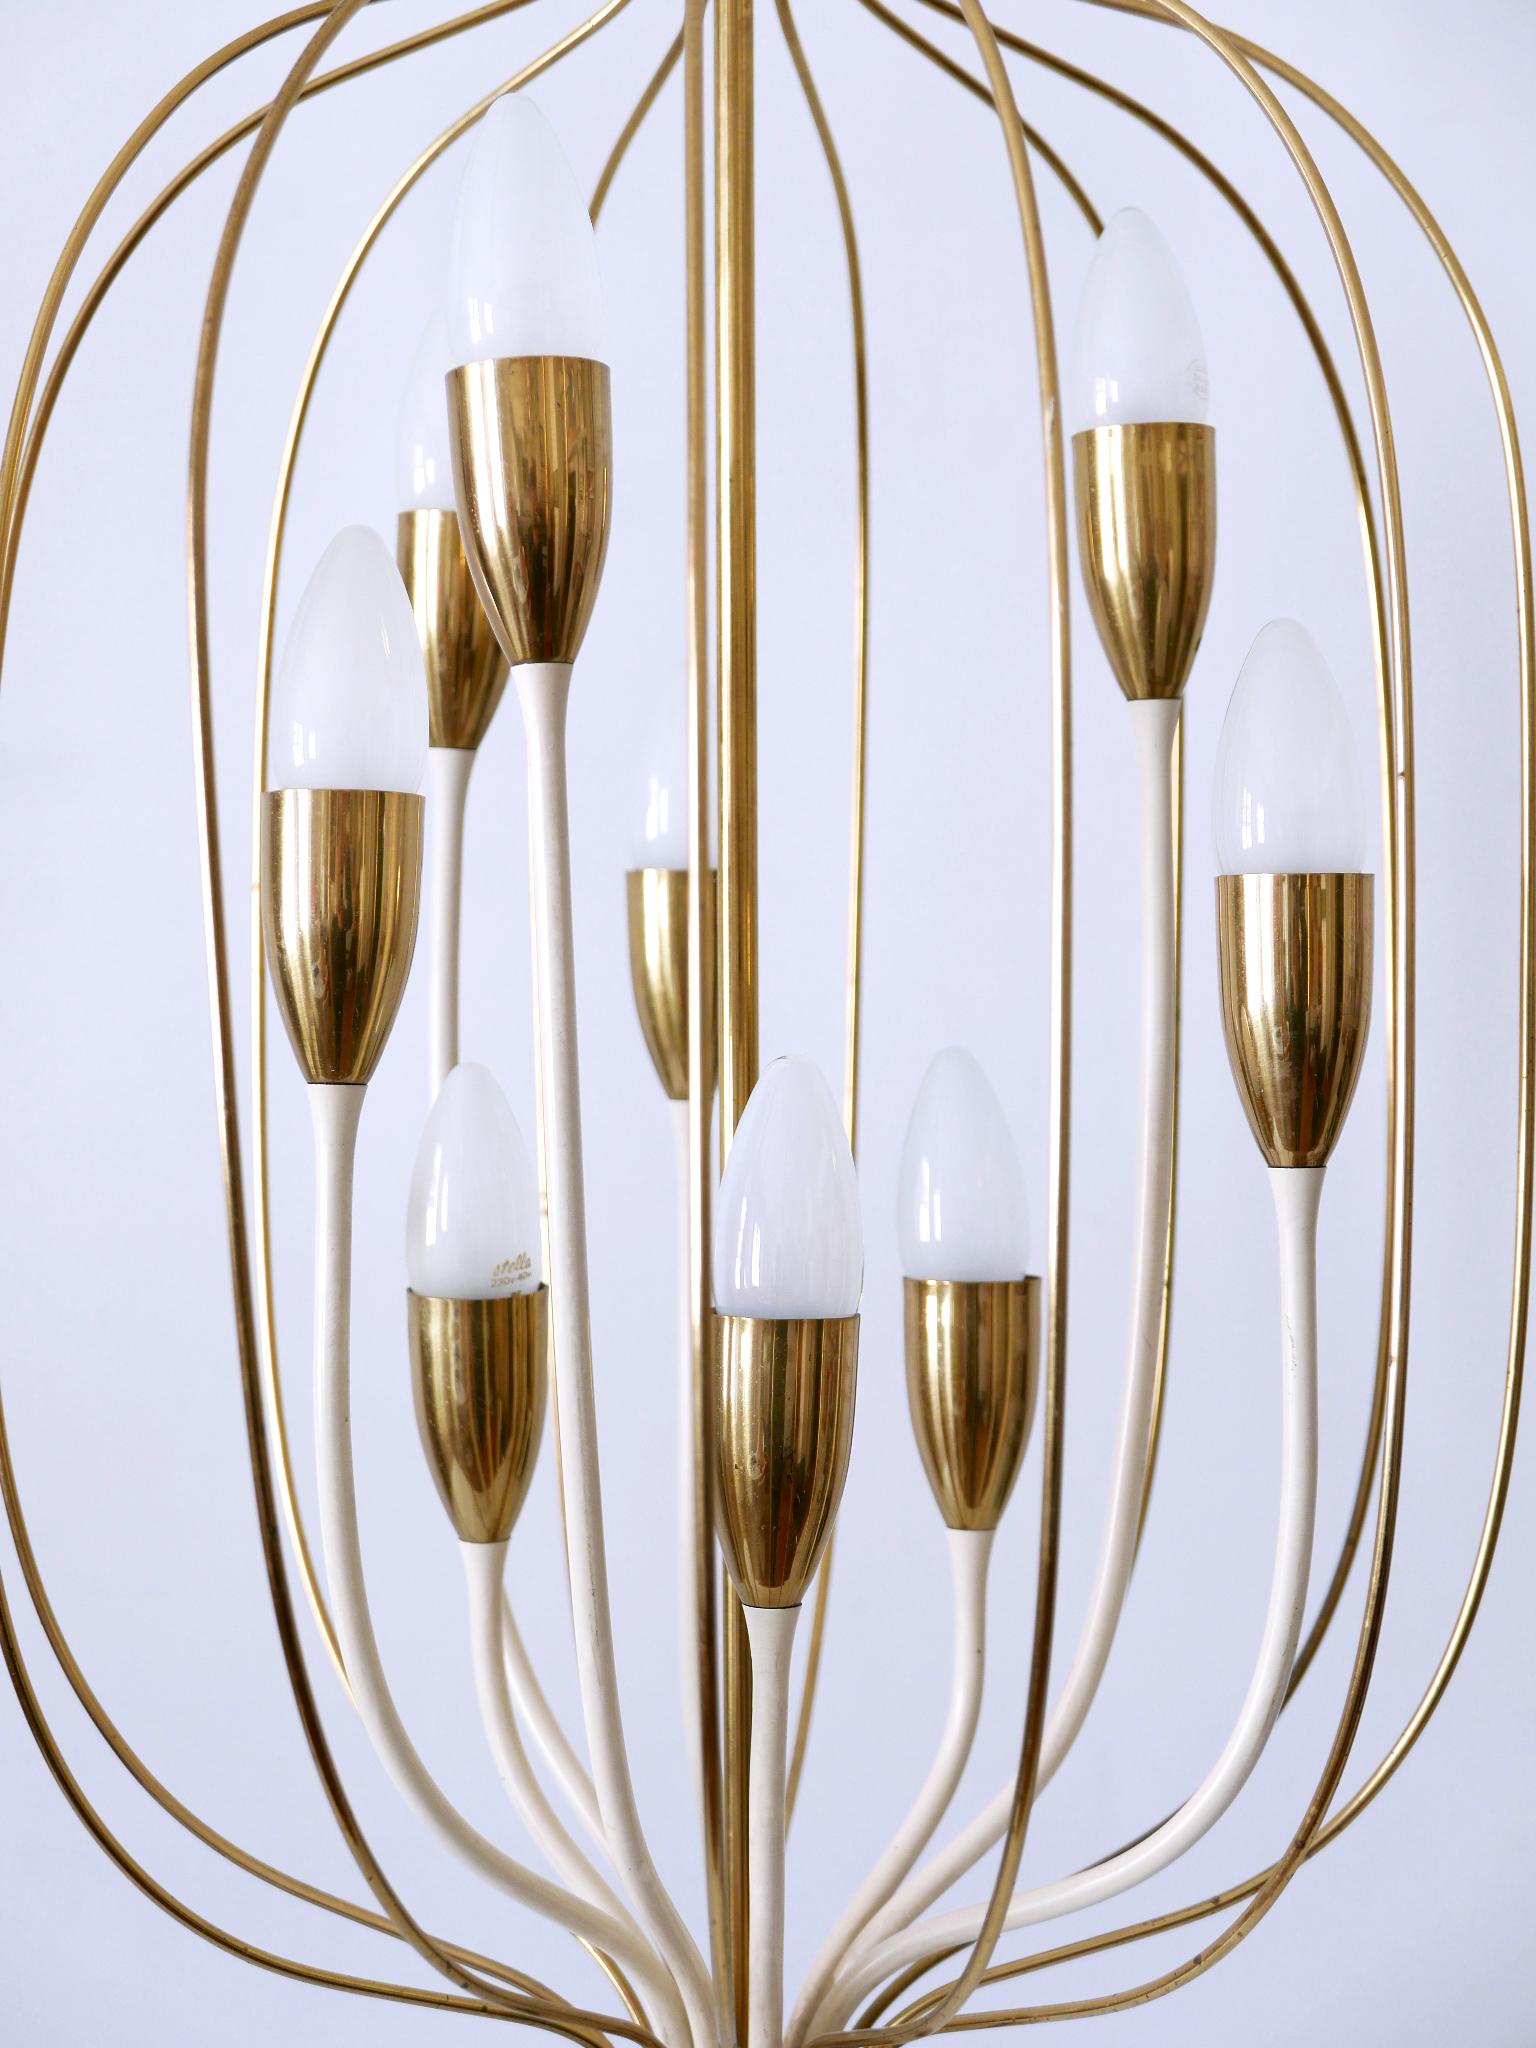 Exceptional Mid-Century Modern Nine-Flamed Chandelier or Pendant Lamp 1950s In Good Condition For Sale In Munich, DE